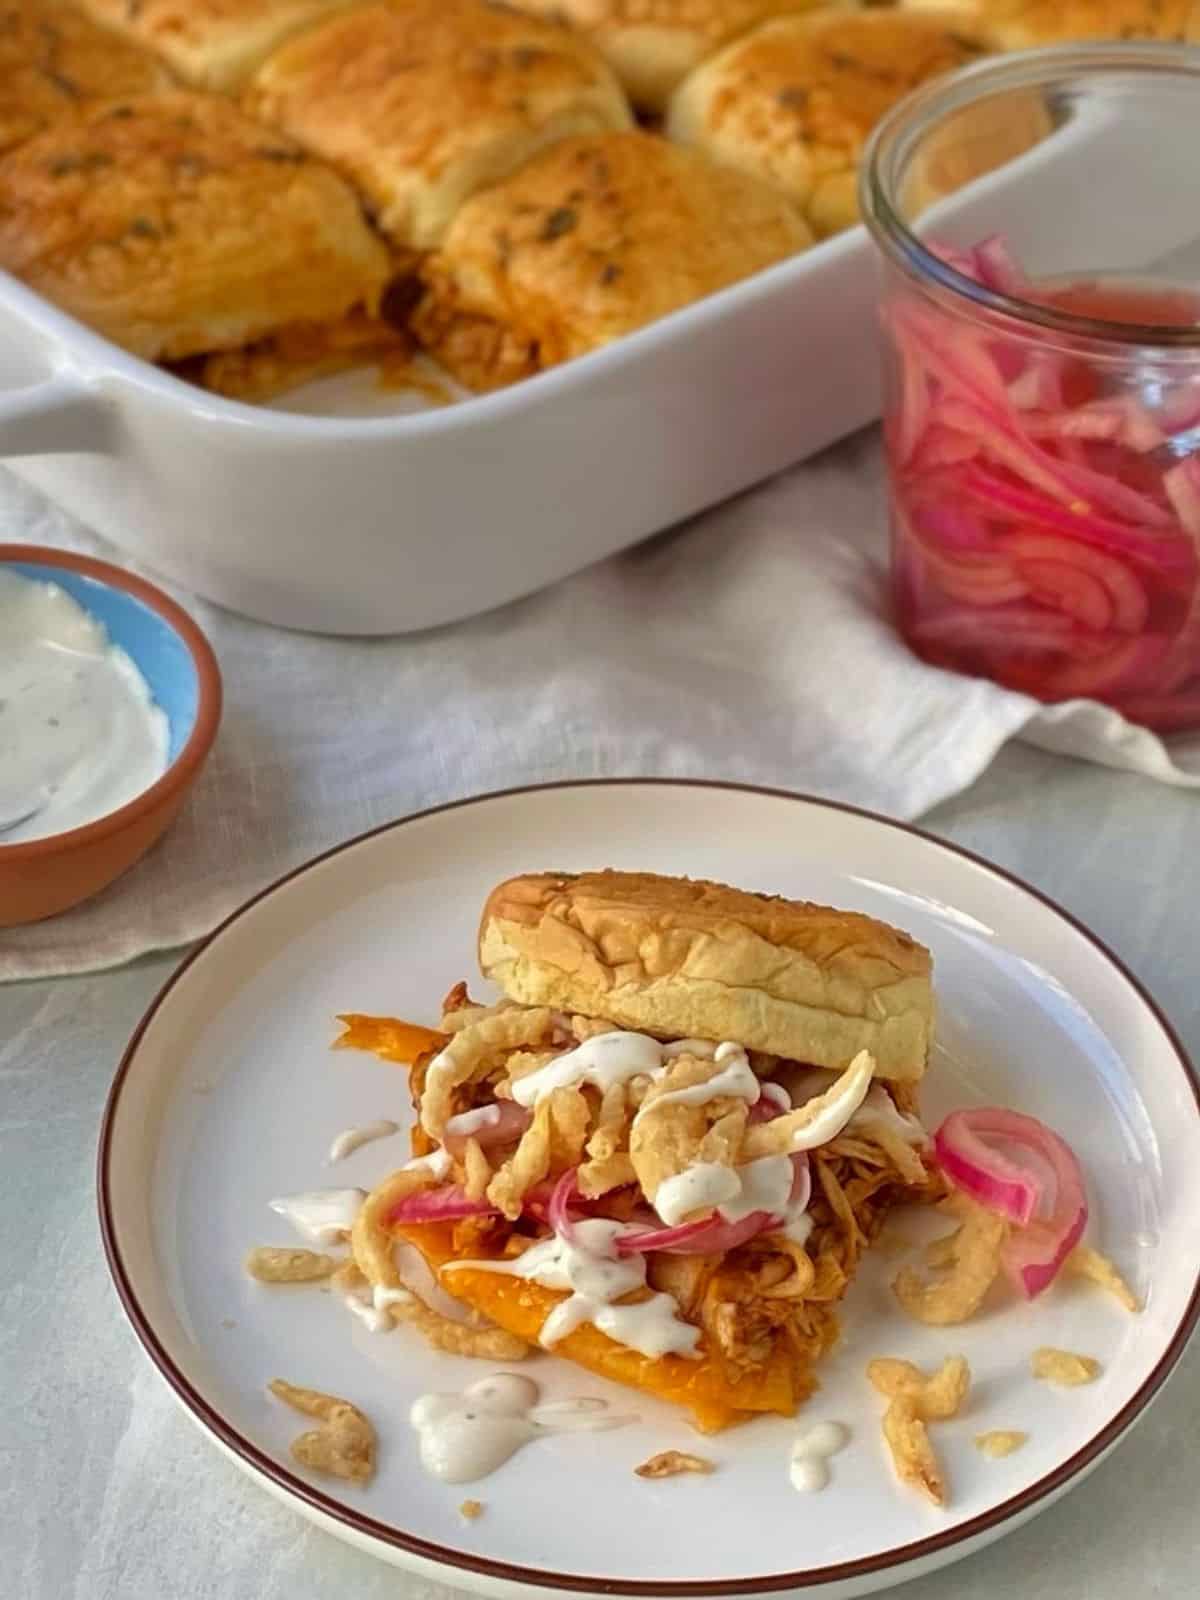 chicken slider on a plate with casserole dish in background.